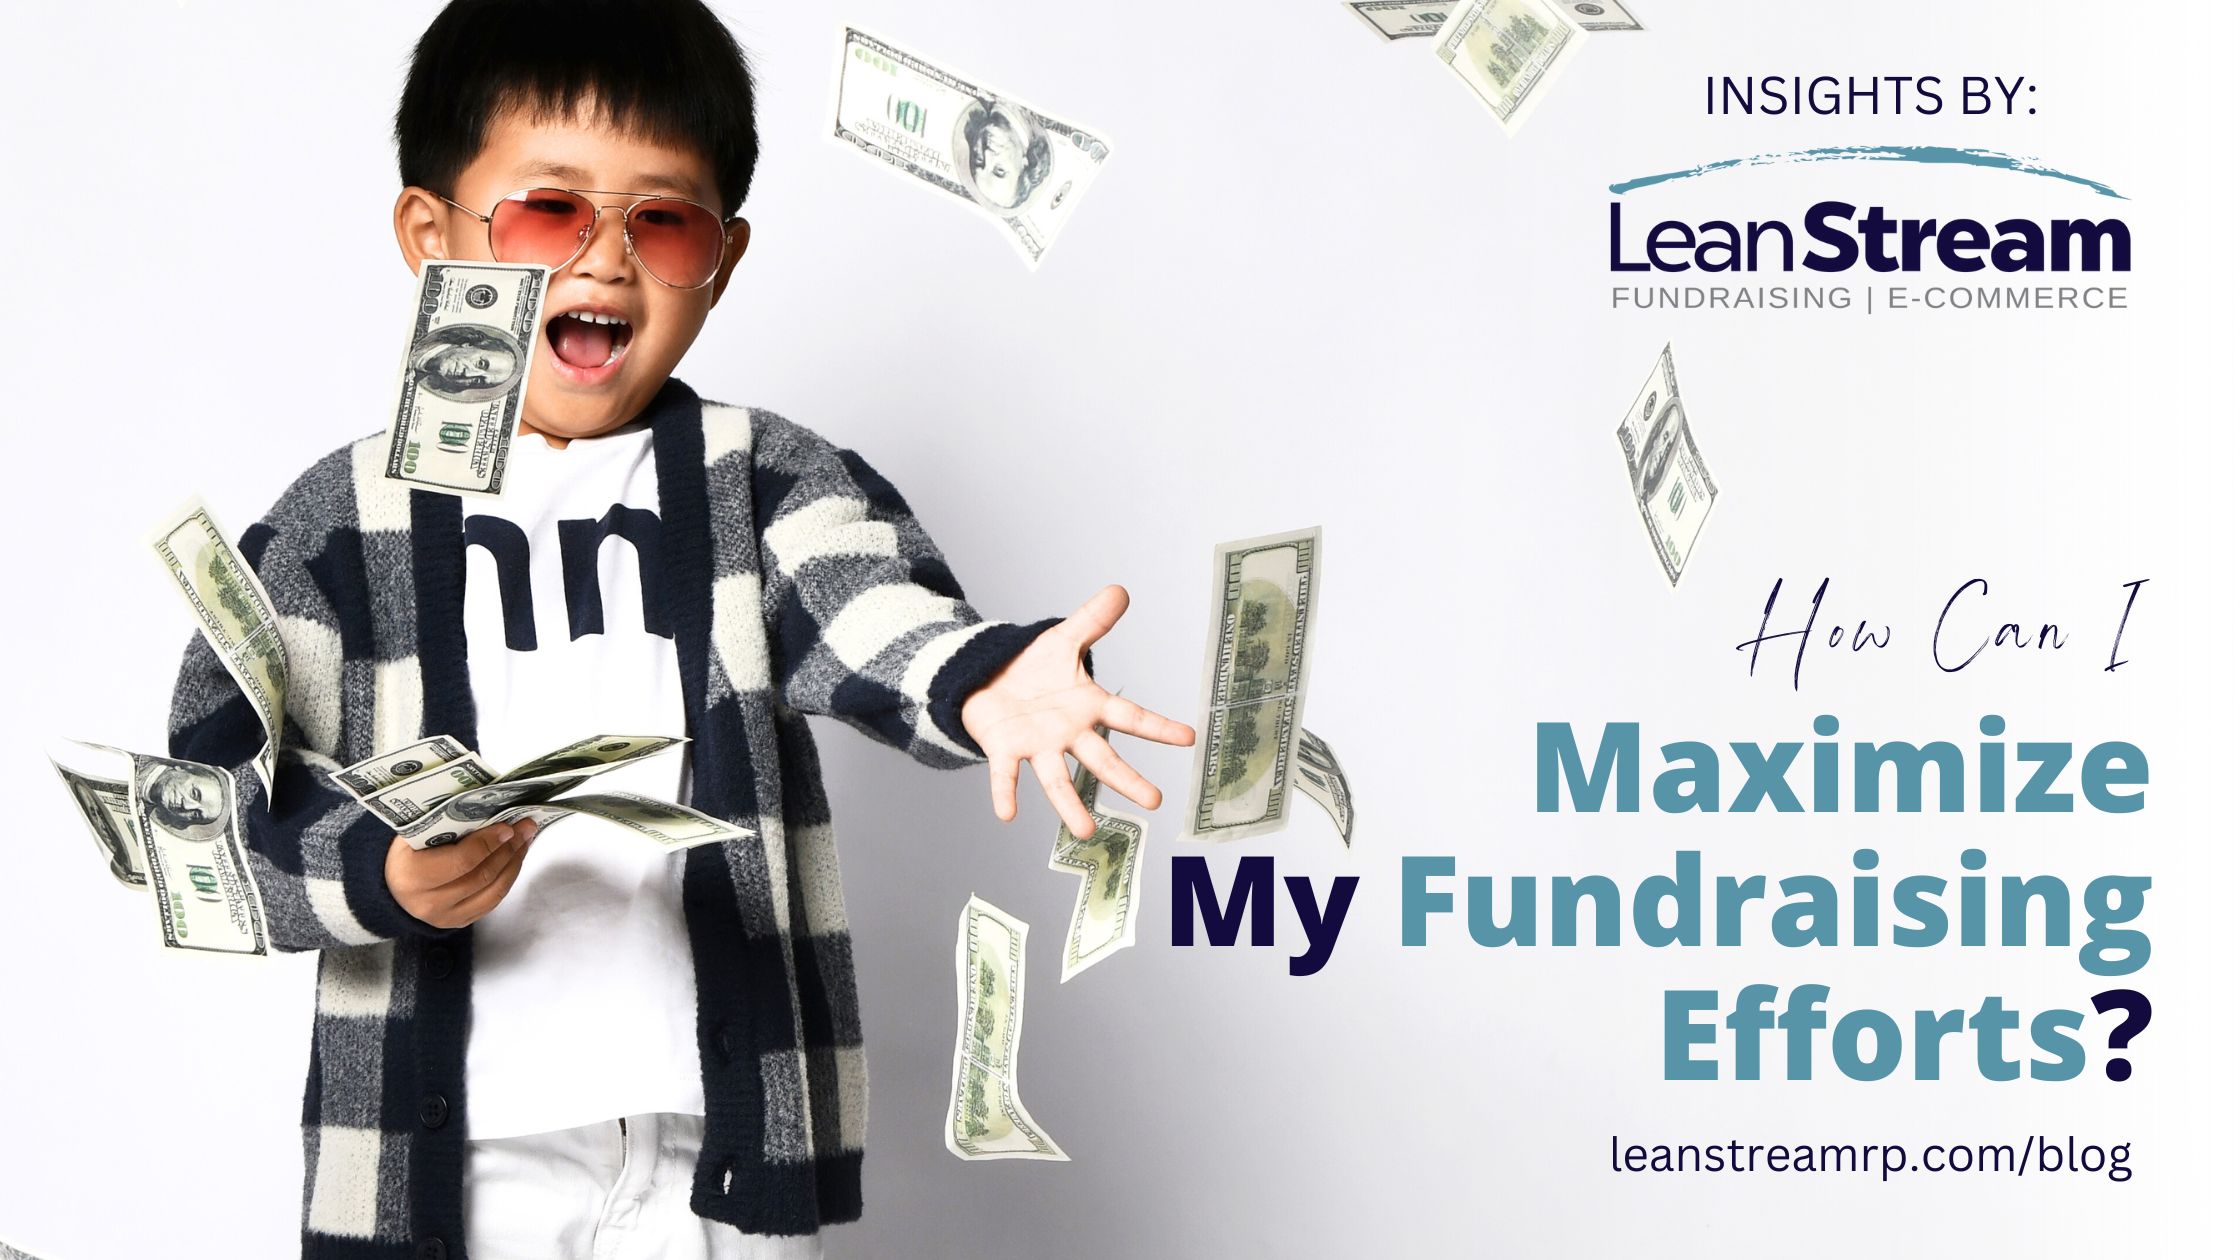 LeanStream Blog - How Can I Maximize My Fundraising Efforts?